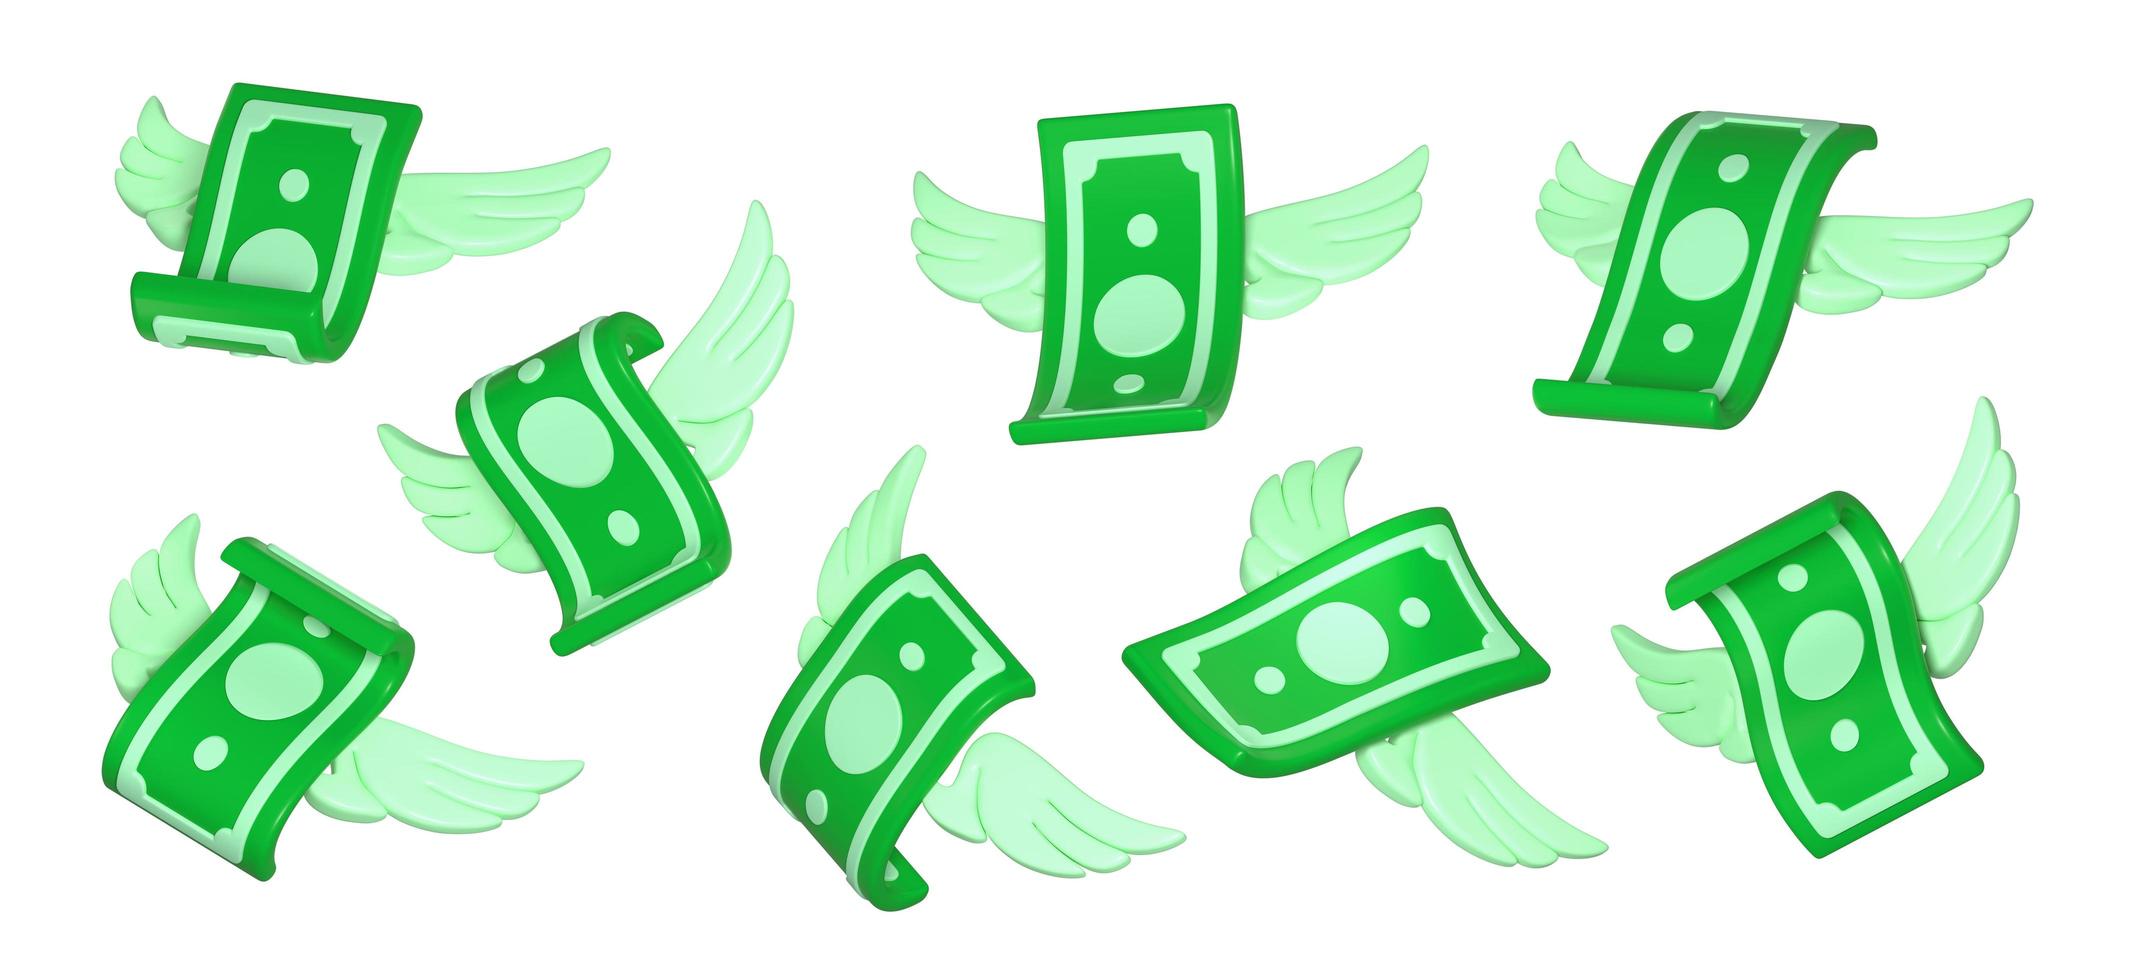 3d render flying banknotes with wings, money set photo